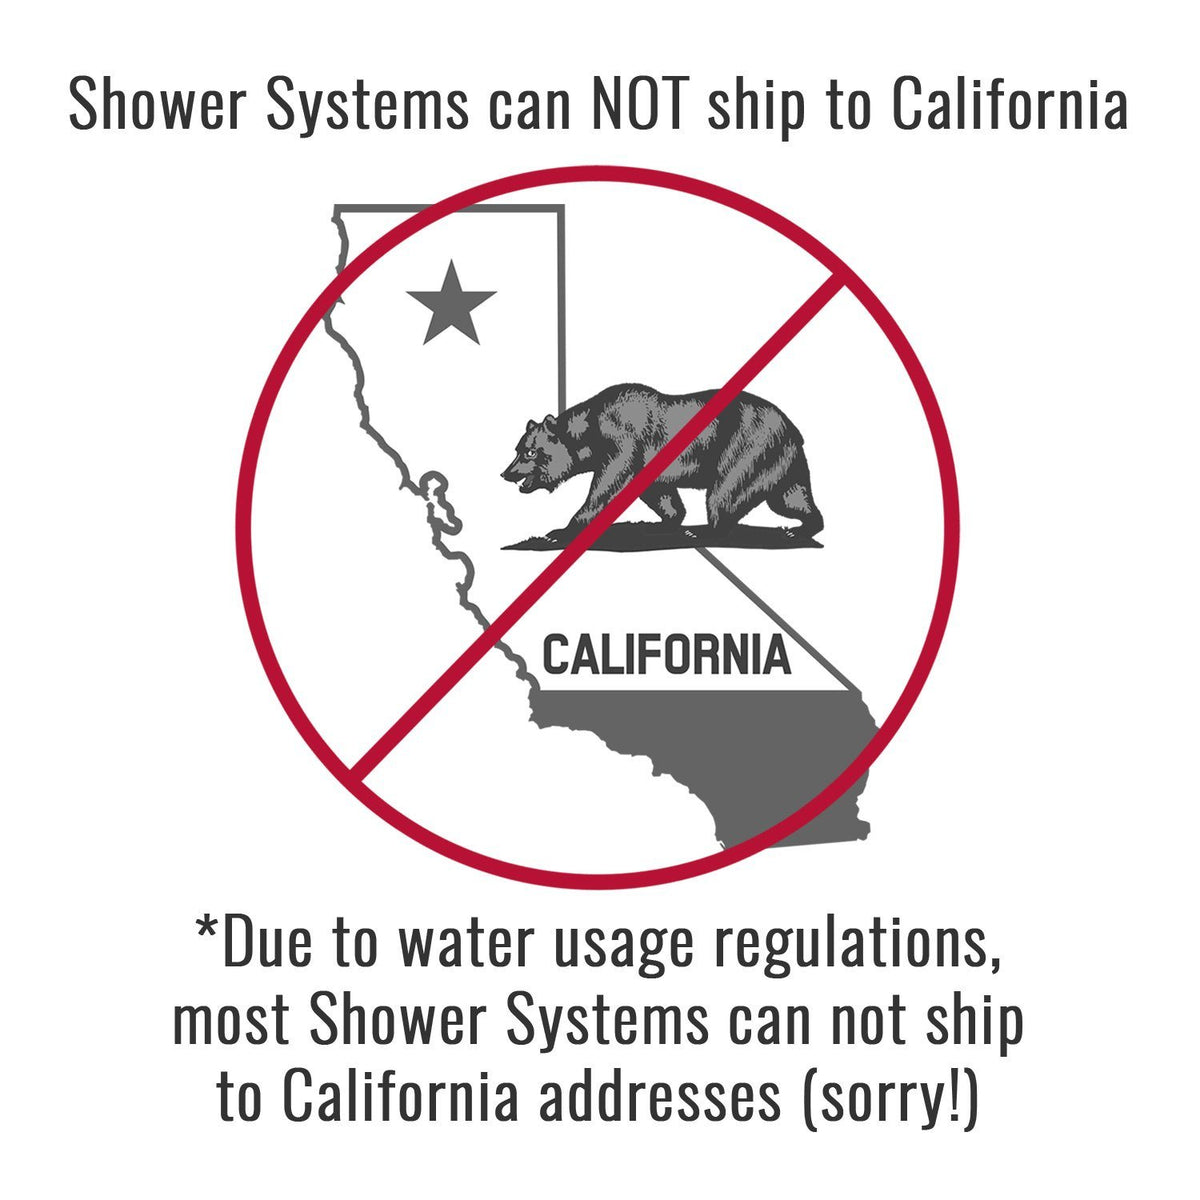 Shower Systems Cannot Ship To California Image 0ba09173 Ac27 459a 943a 3648a04a3f4a 1200x ?v=1539124606